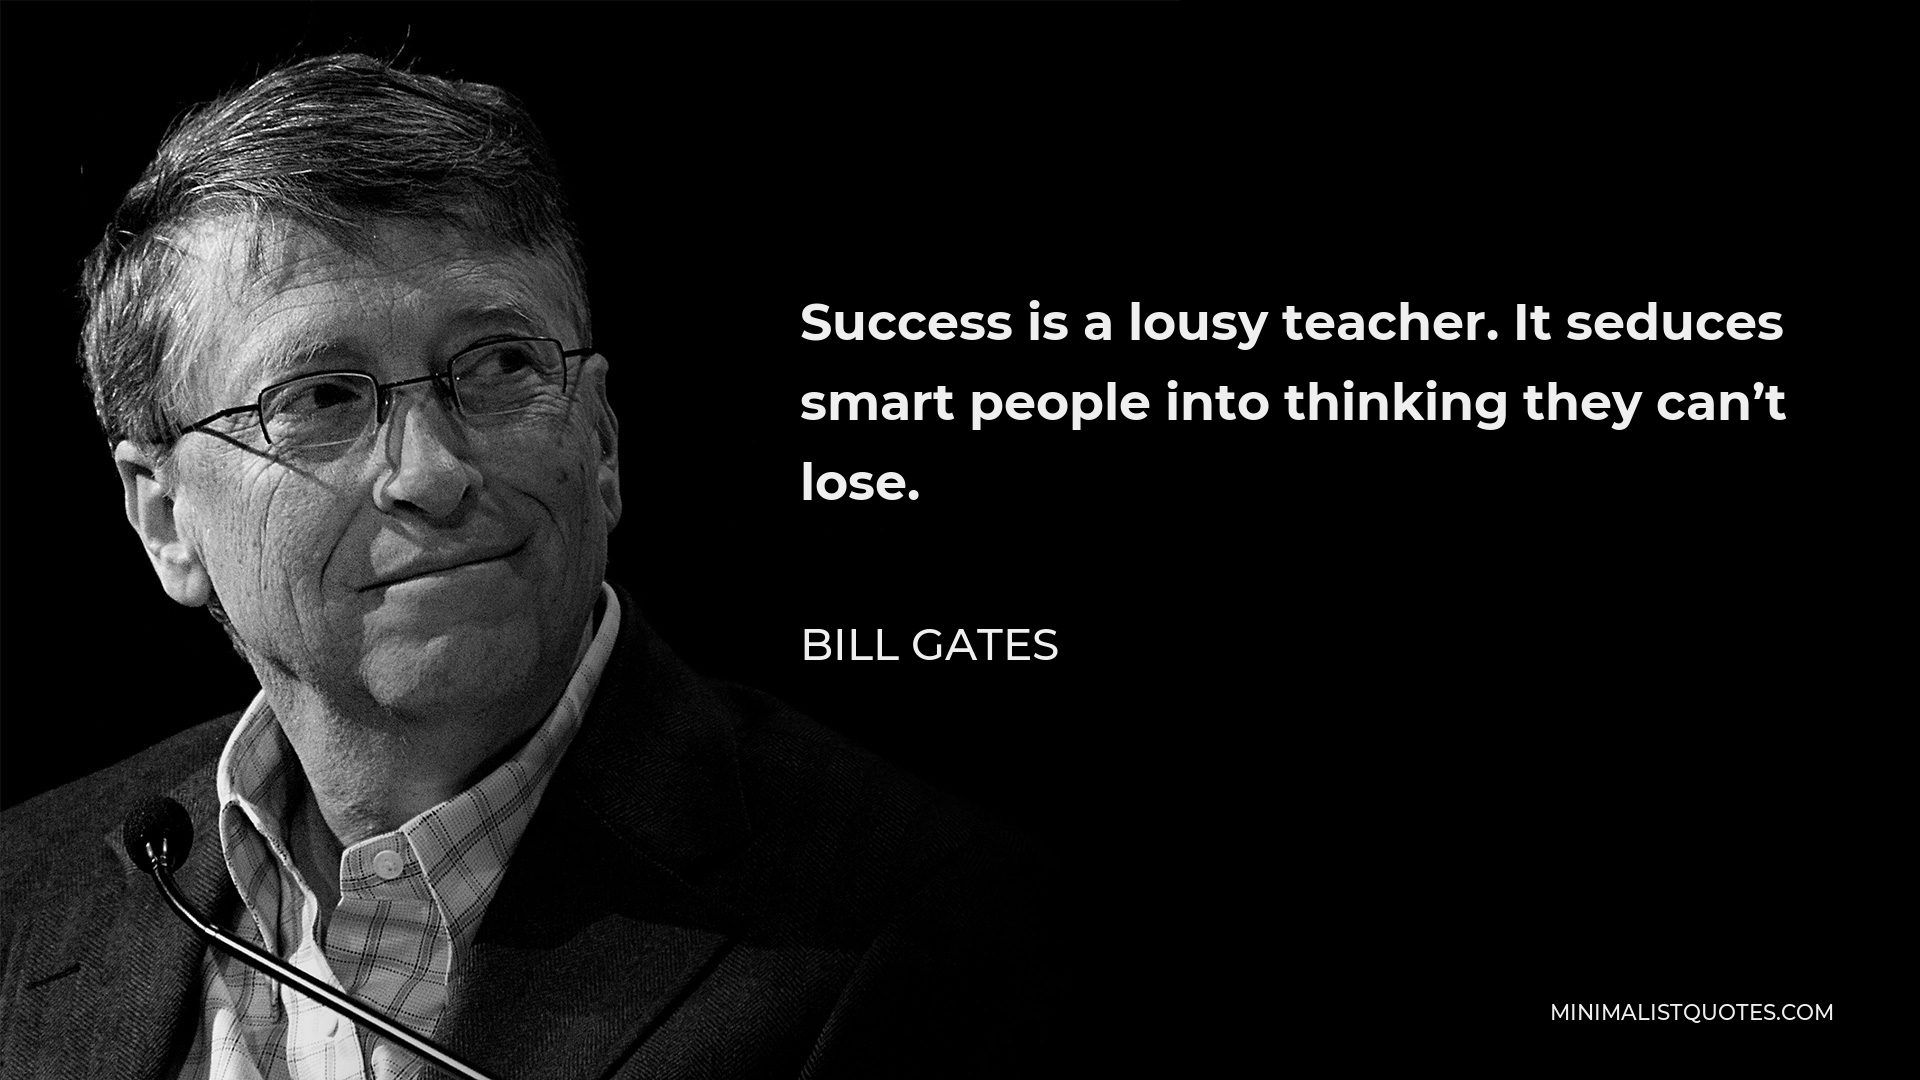 Bill Gates Quote - Success is a lousy teacher. It seduces smart people into thinking they can’t lose.